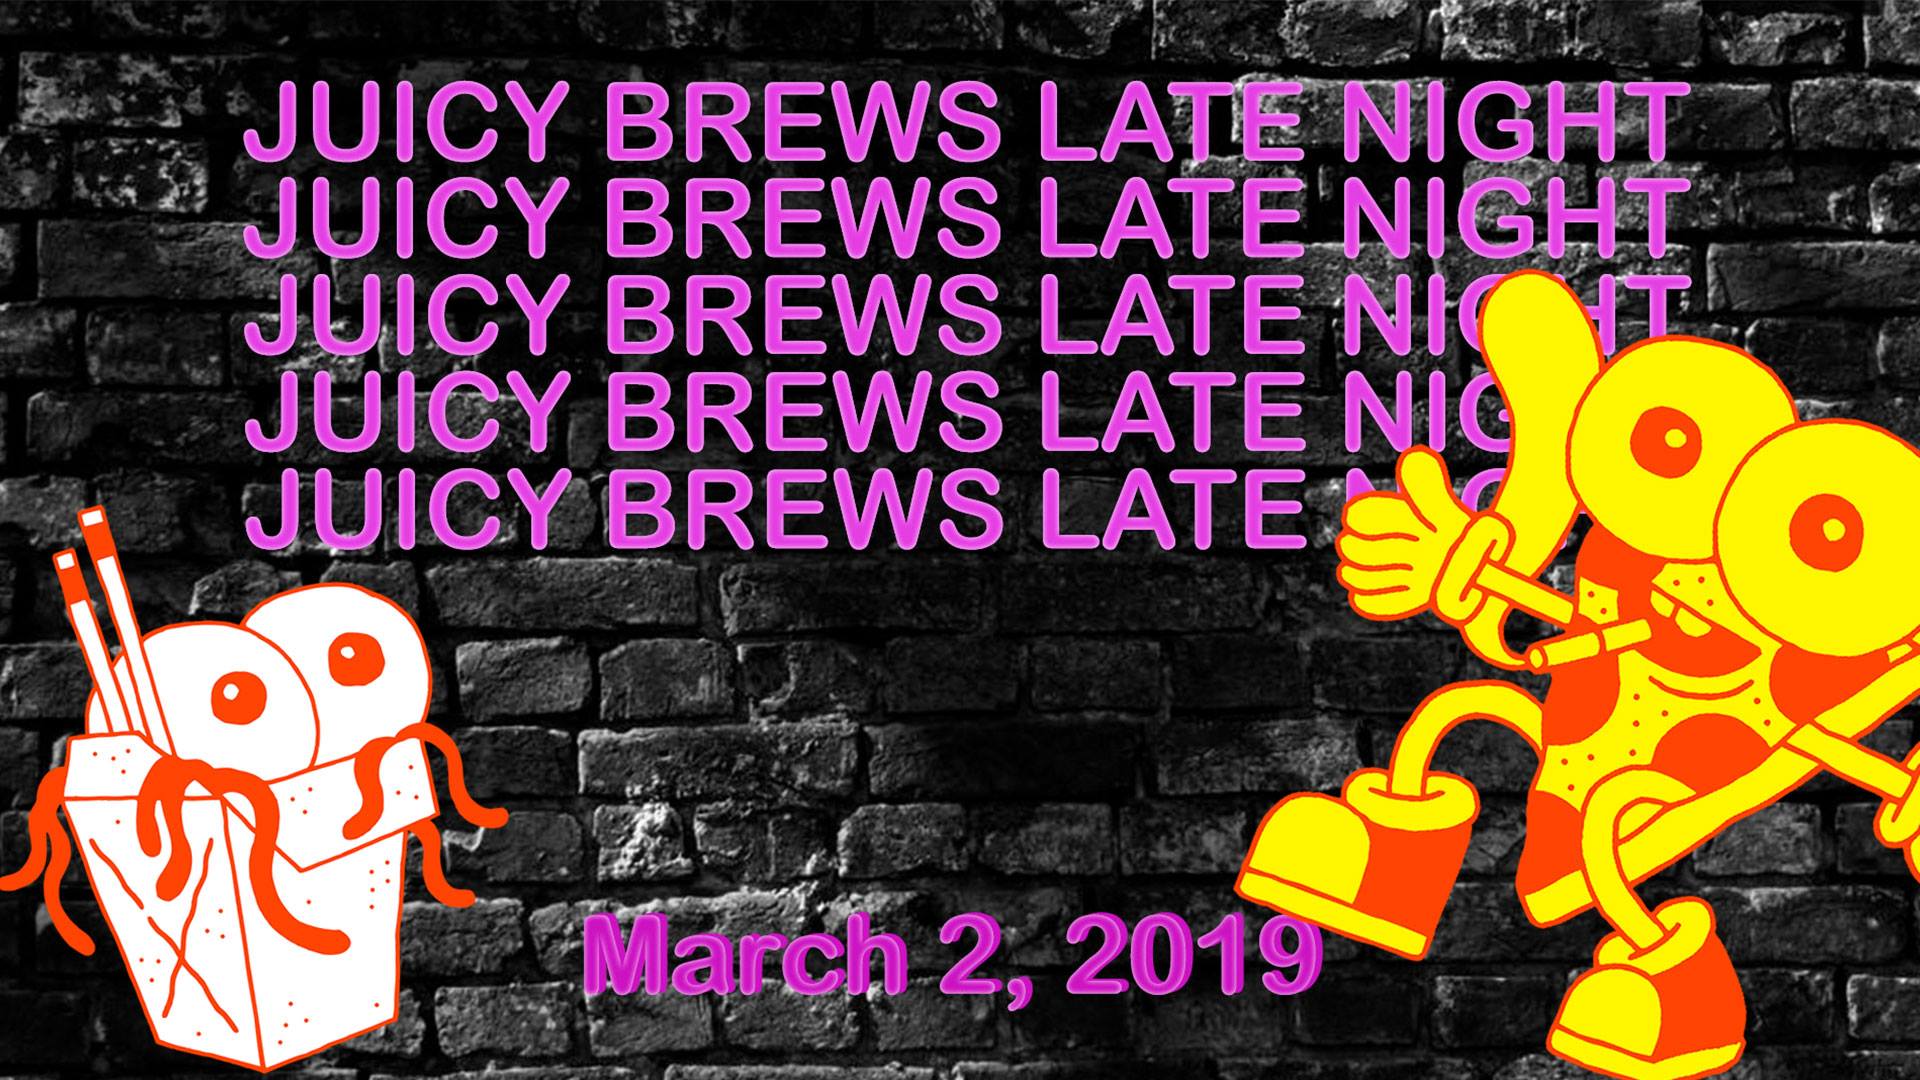 Here’s What to Drink at Juicy Brews Late Night